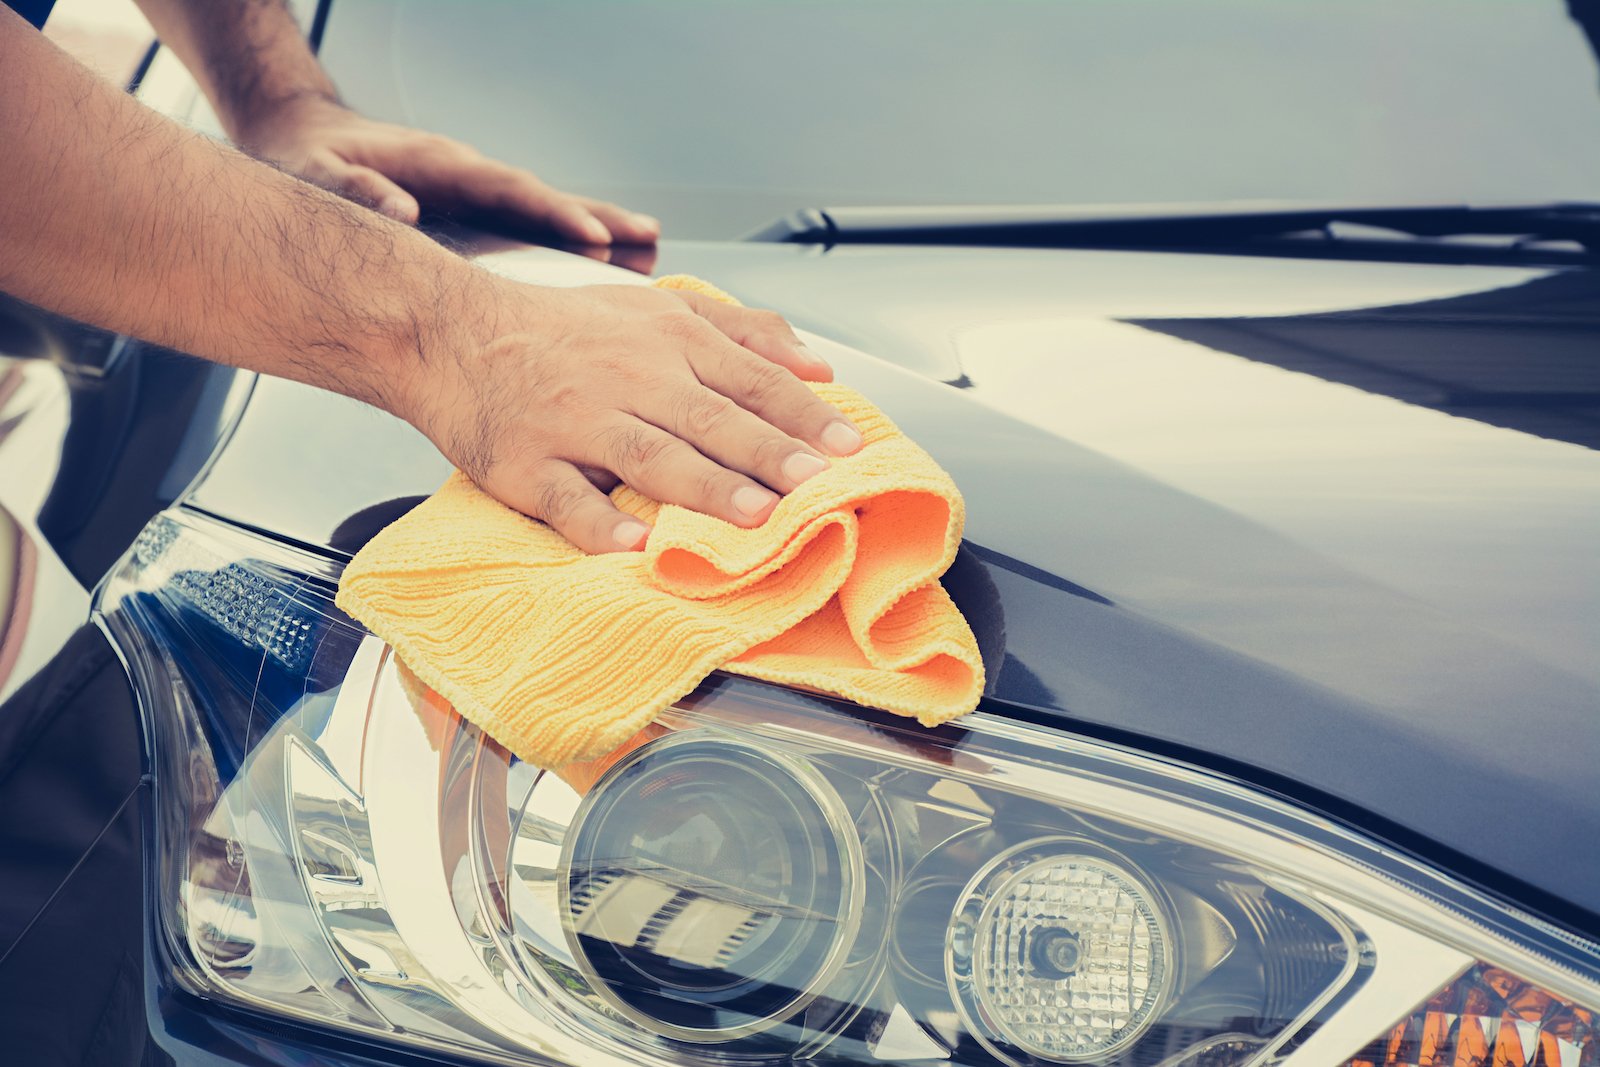 Tips to Keep Your Car Clean